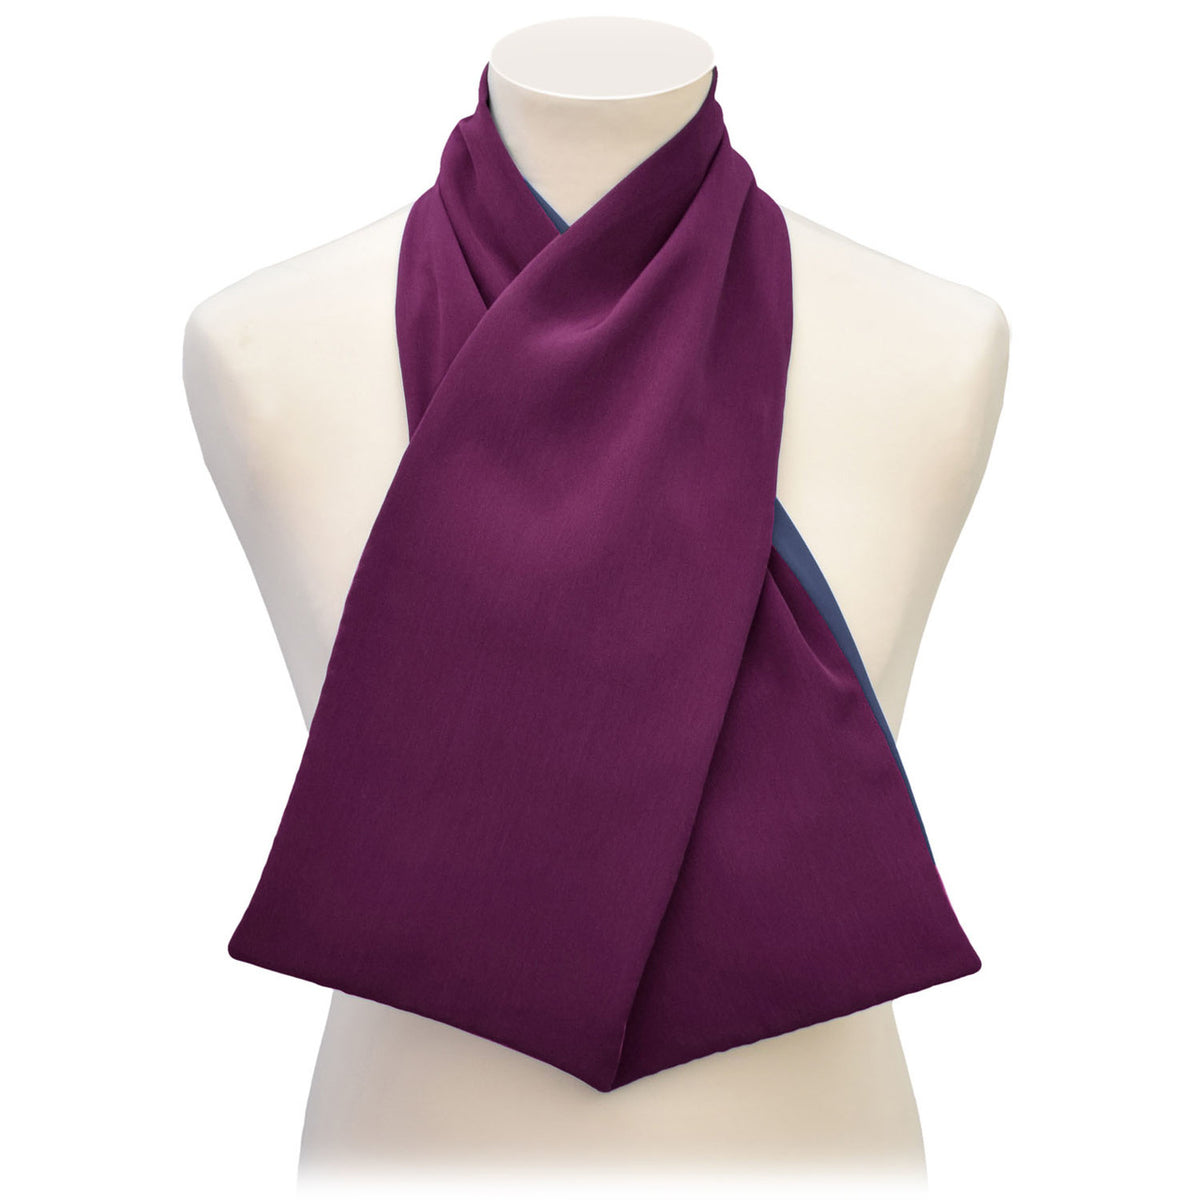 Cross Scarf Clothing Protector - Aubergine | Health Care | Care Designs